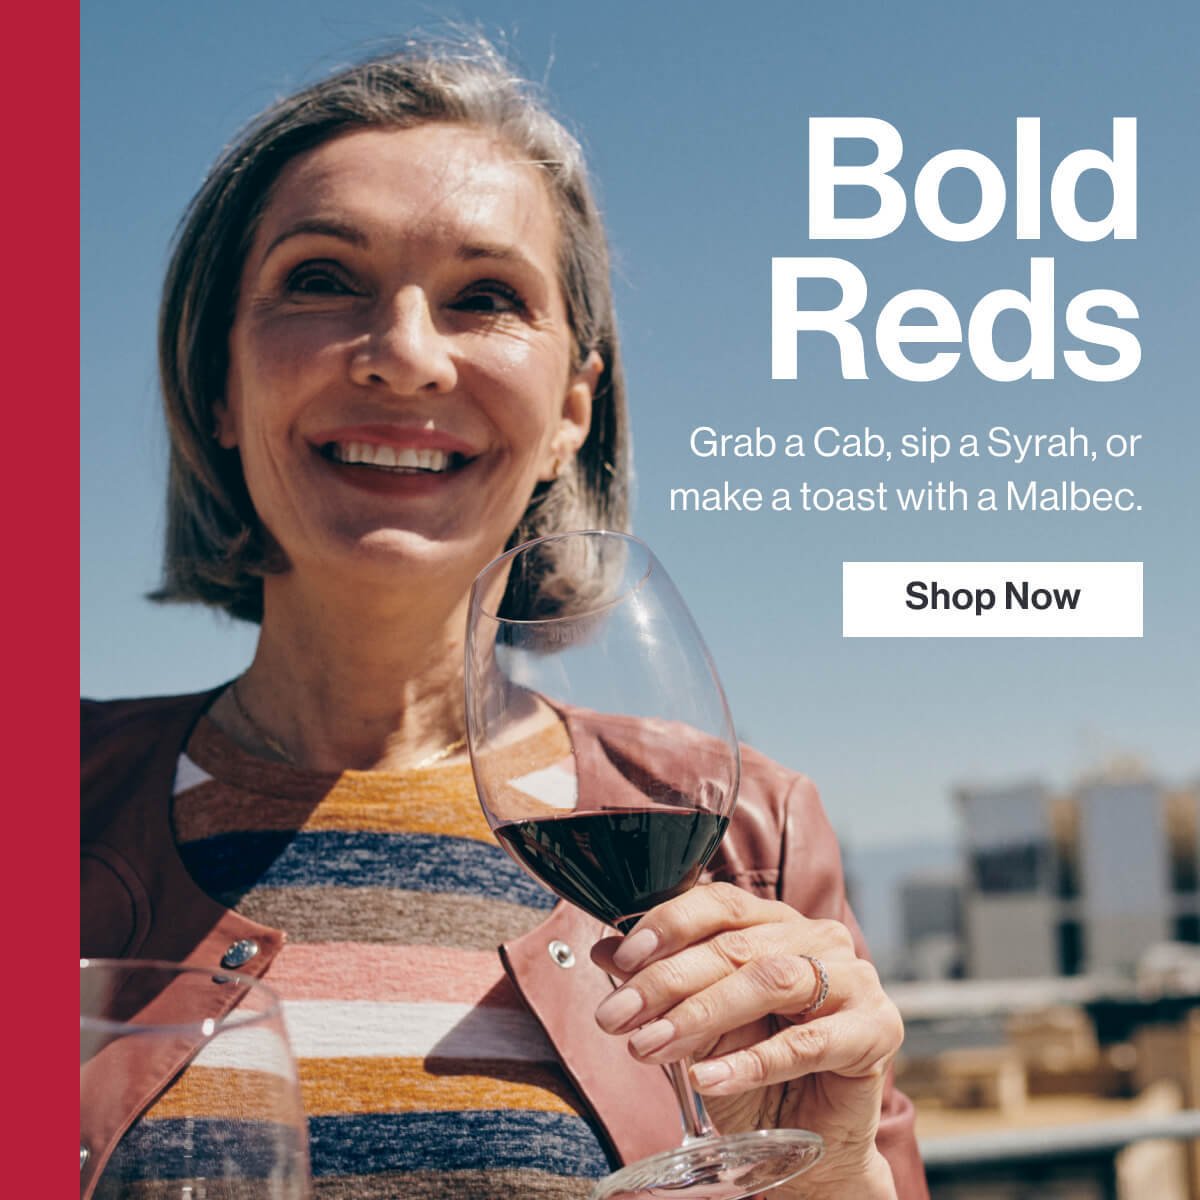 Bold Reds - Grab a Cab, sip a Syrah or make a toast with a Malbec. Shop Now.